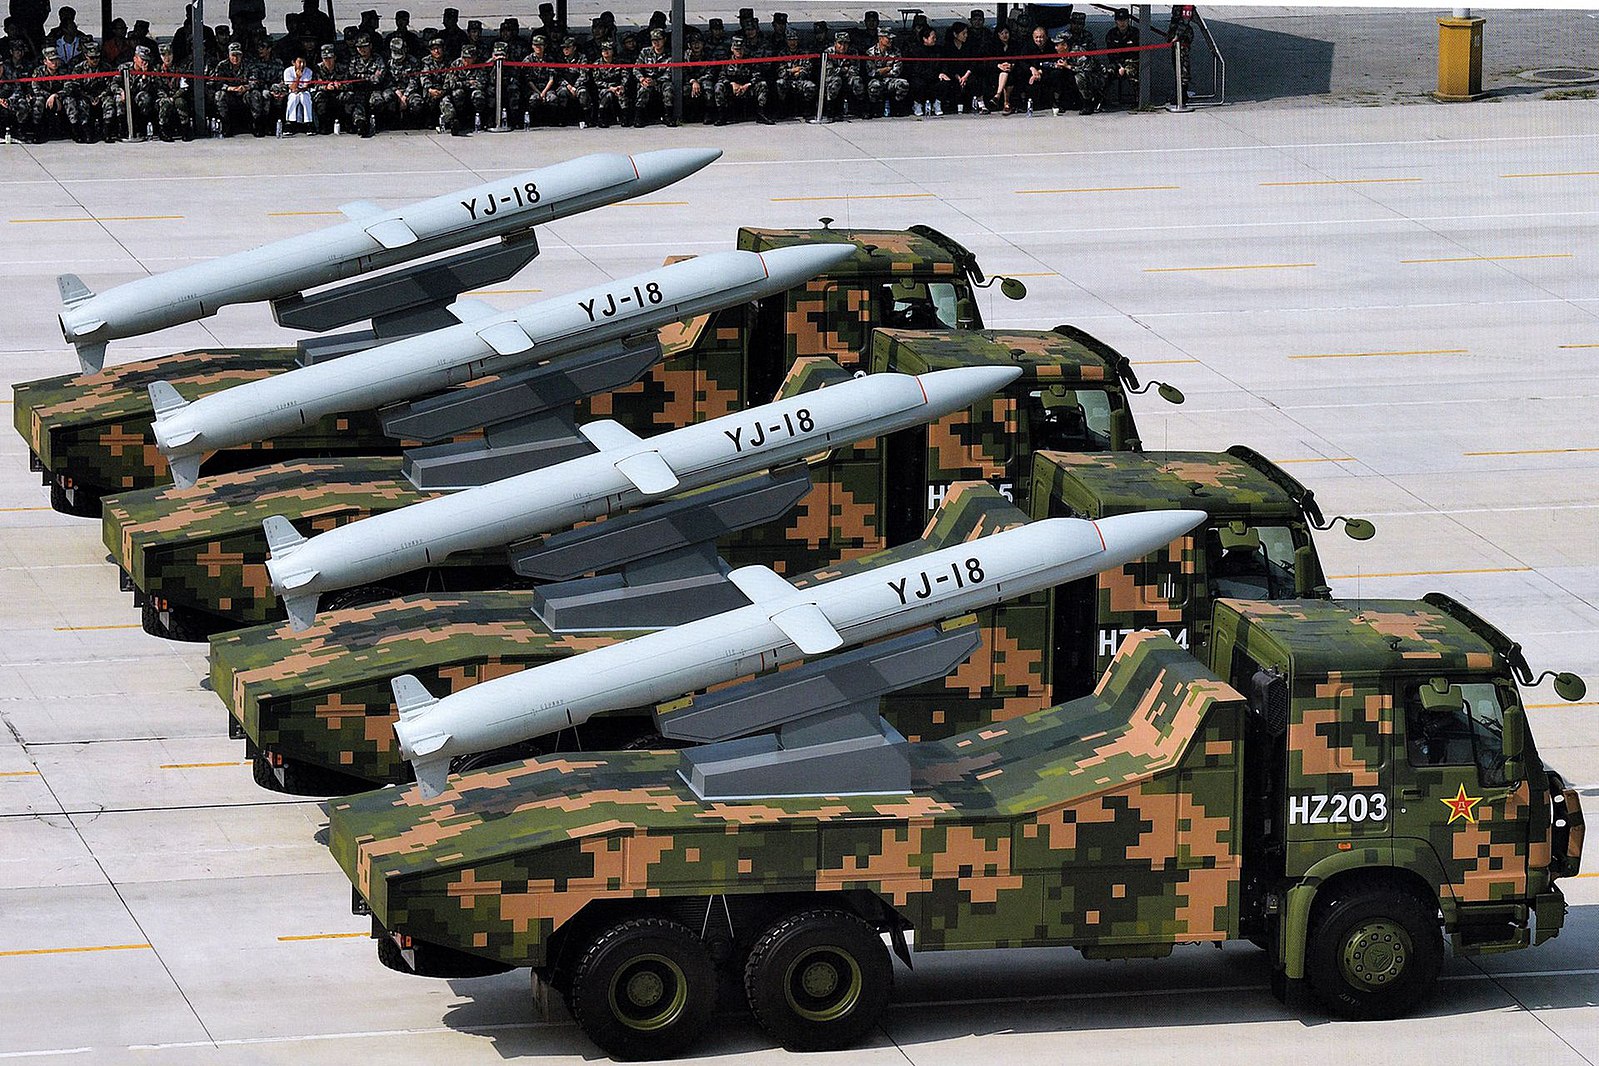 Image: People's Liberation Army/Navy Operated Chinese Cruise Missiles by Salah Rashad Zaqzoq